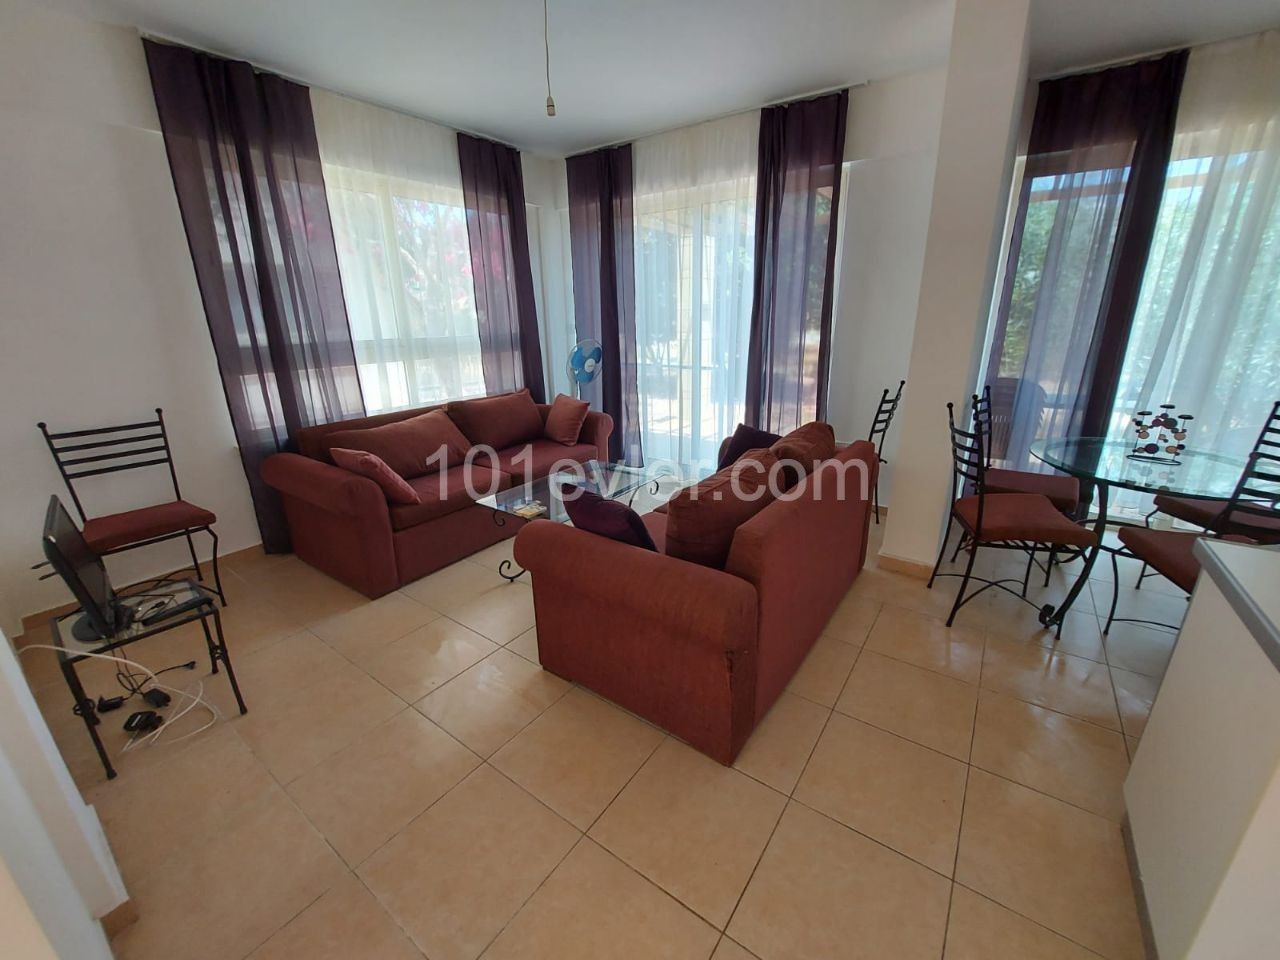 2+1 apartment for rent in Esentepe, in residence 